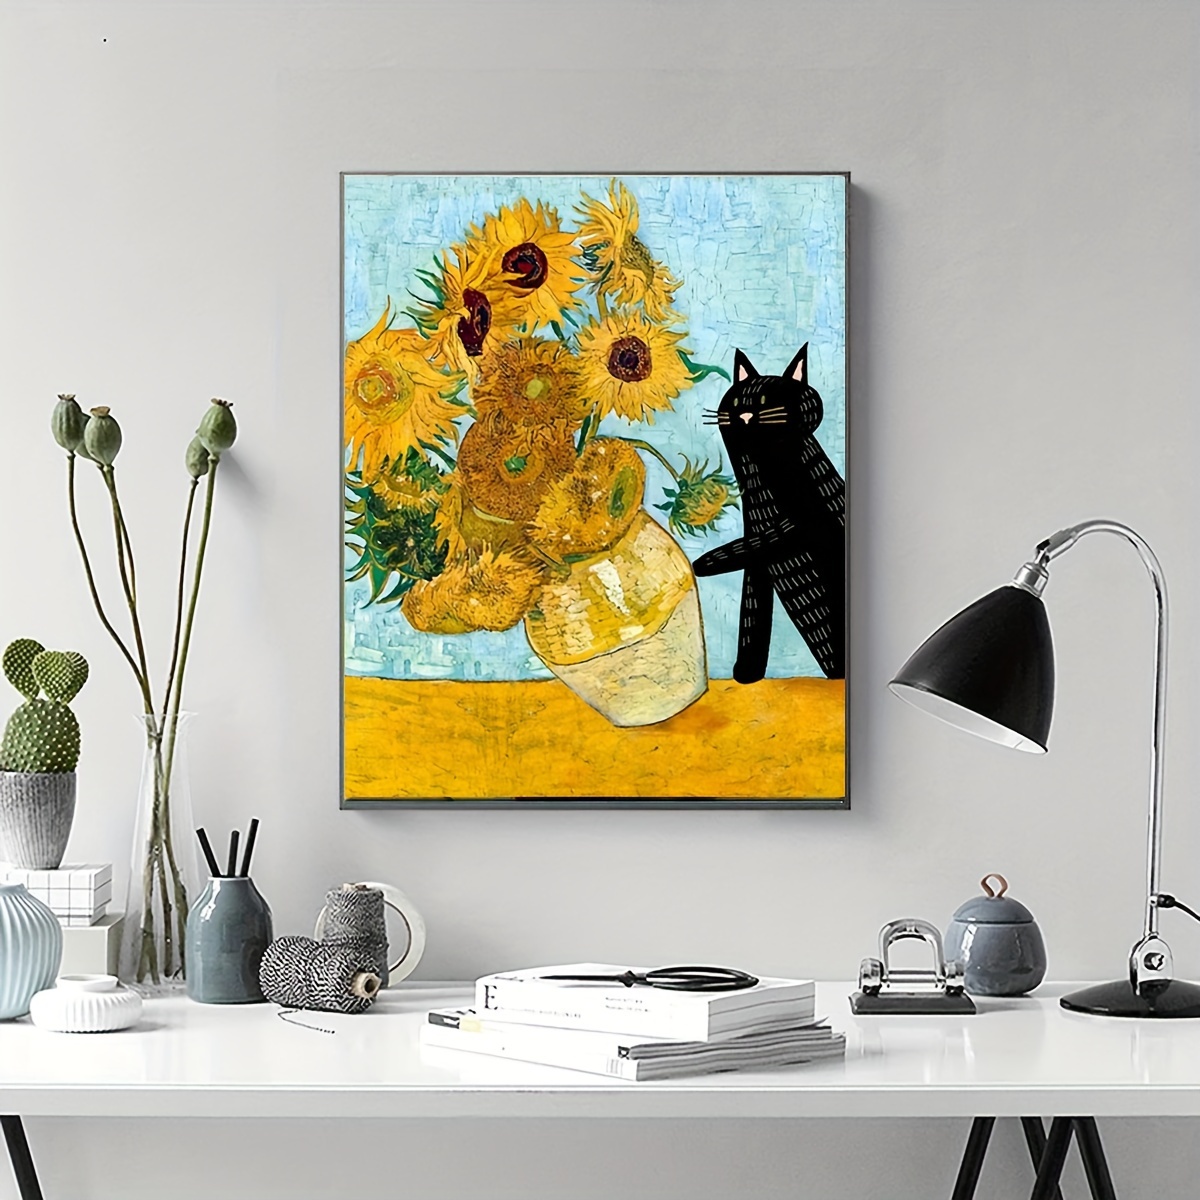 

Black Cat Sunflower Vase Art Diy Paint By Numbers Kit For Adults, Canvas Material Painting Set For Home Decor